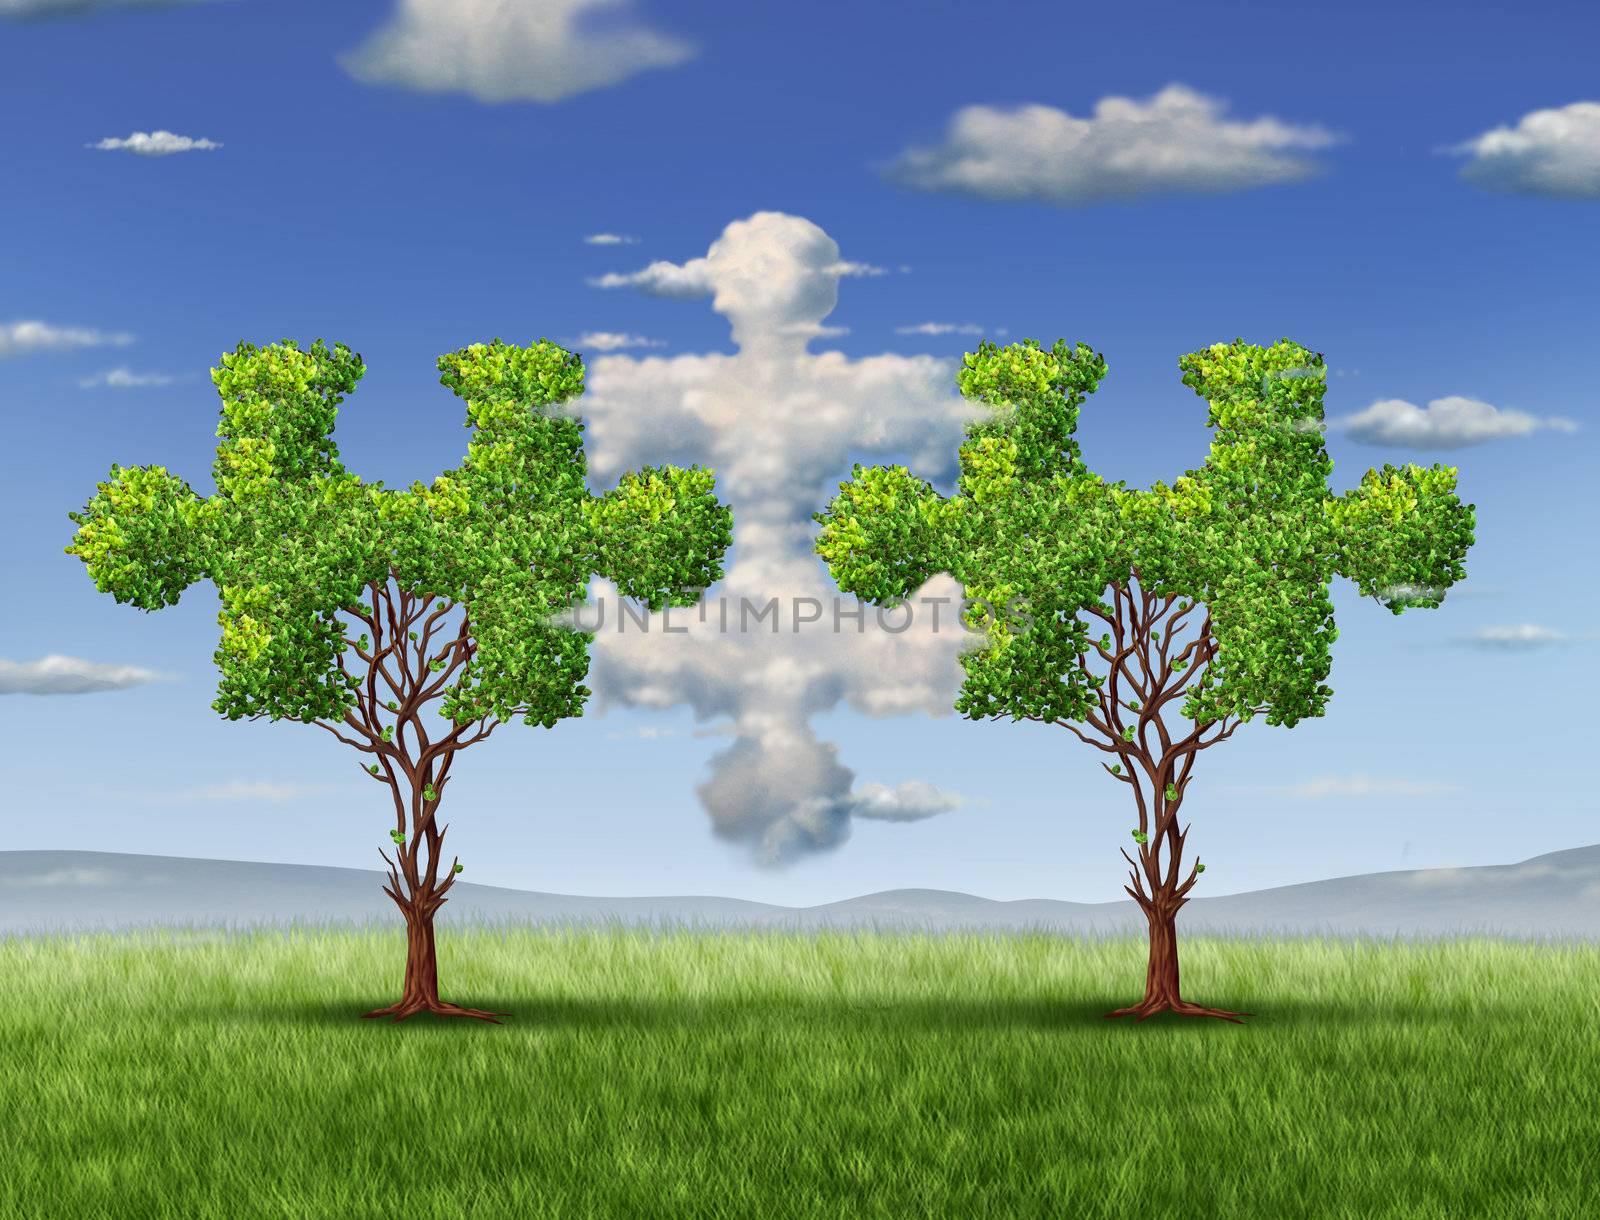 Business connections with the cloud as a network technology and business concept as clouds in the shape of a puzzle piece and a tree shaped as jigsaw game objects coming together as a group of connected  team partners for financial success.